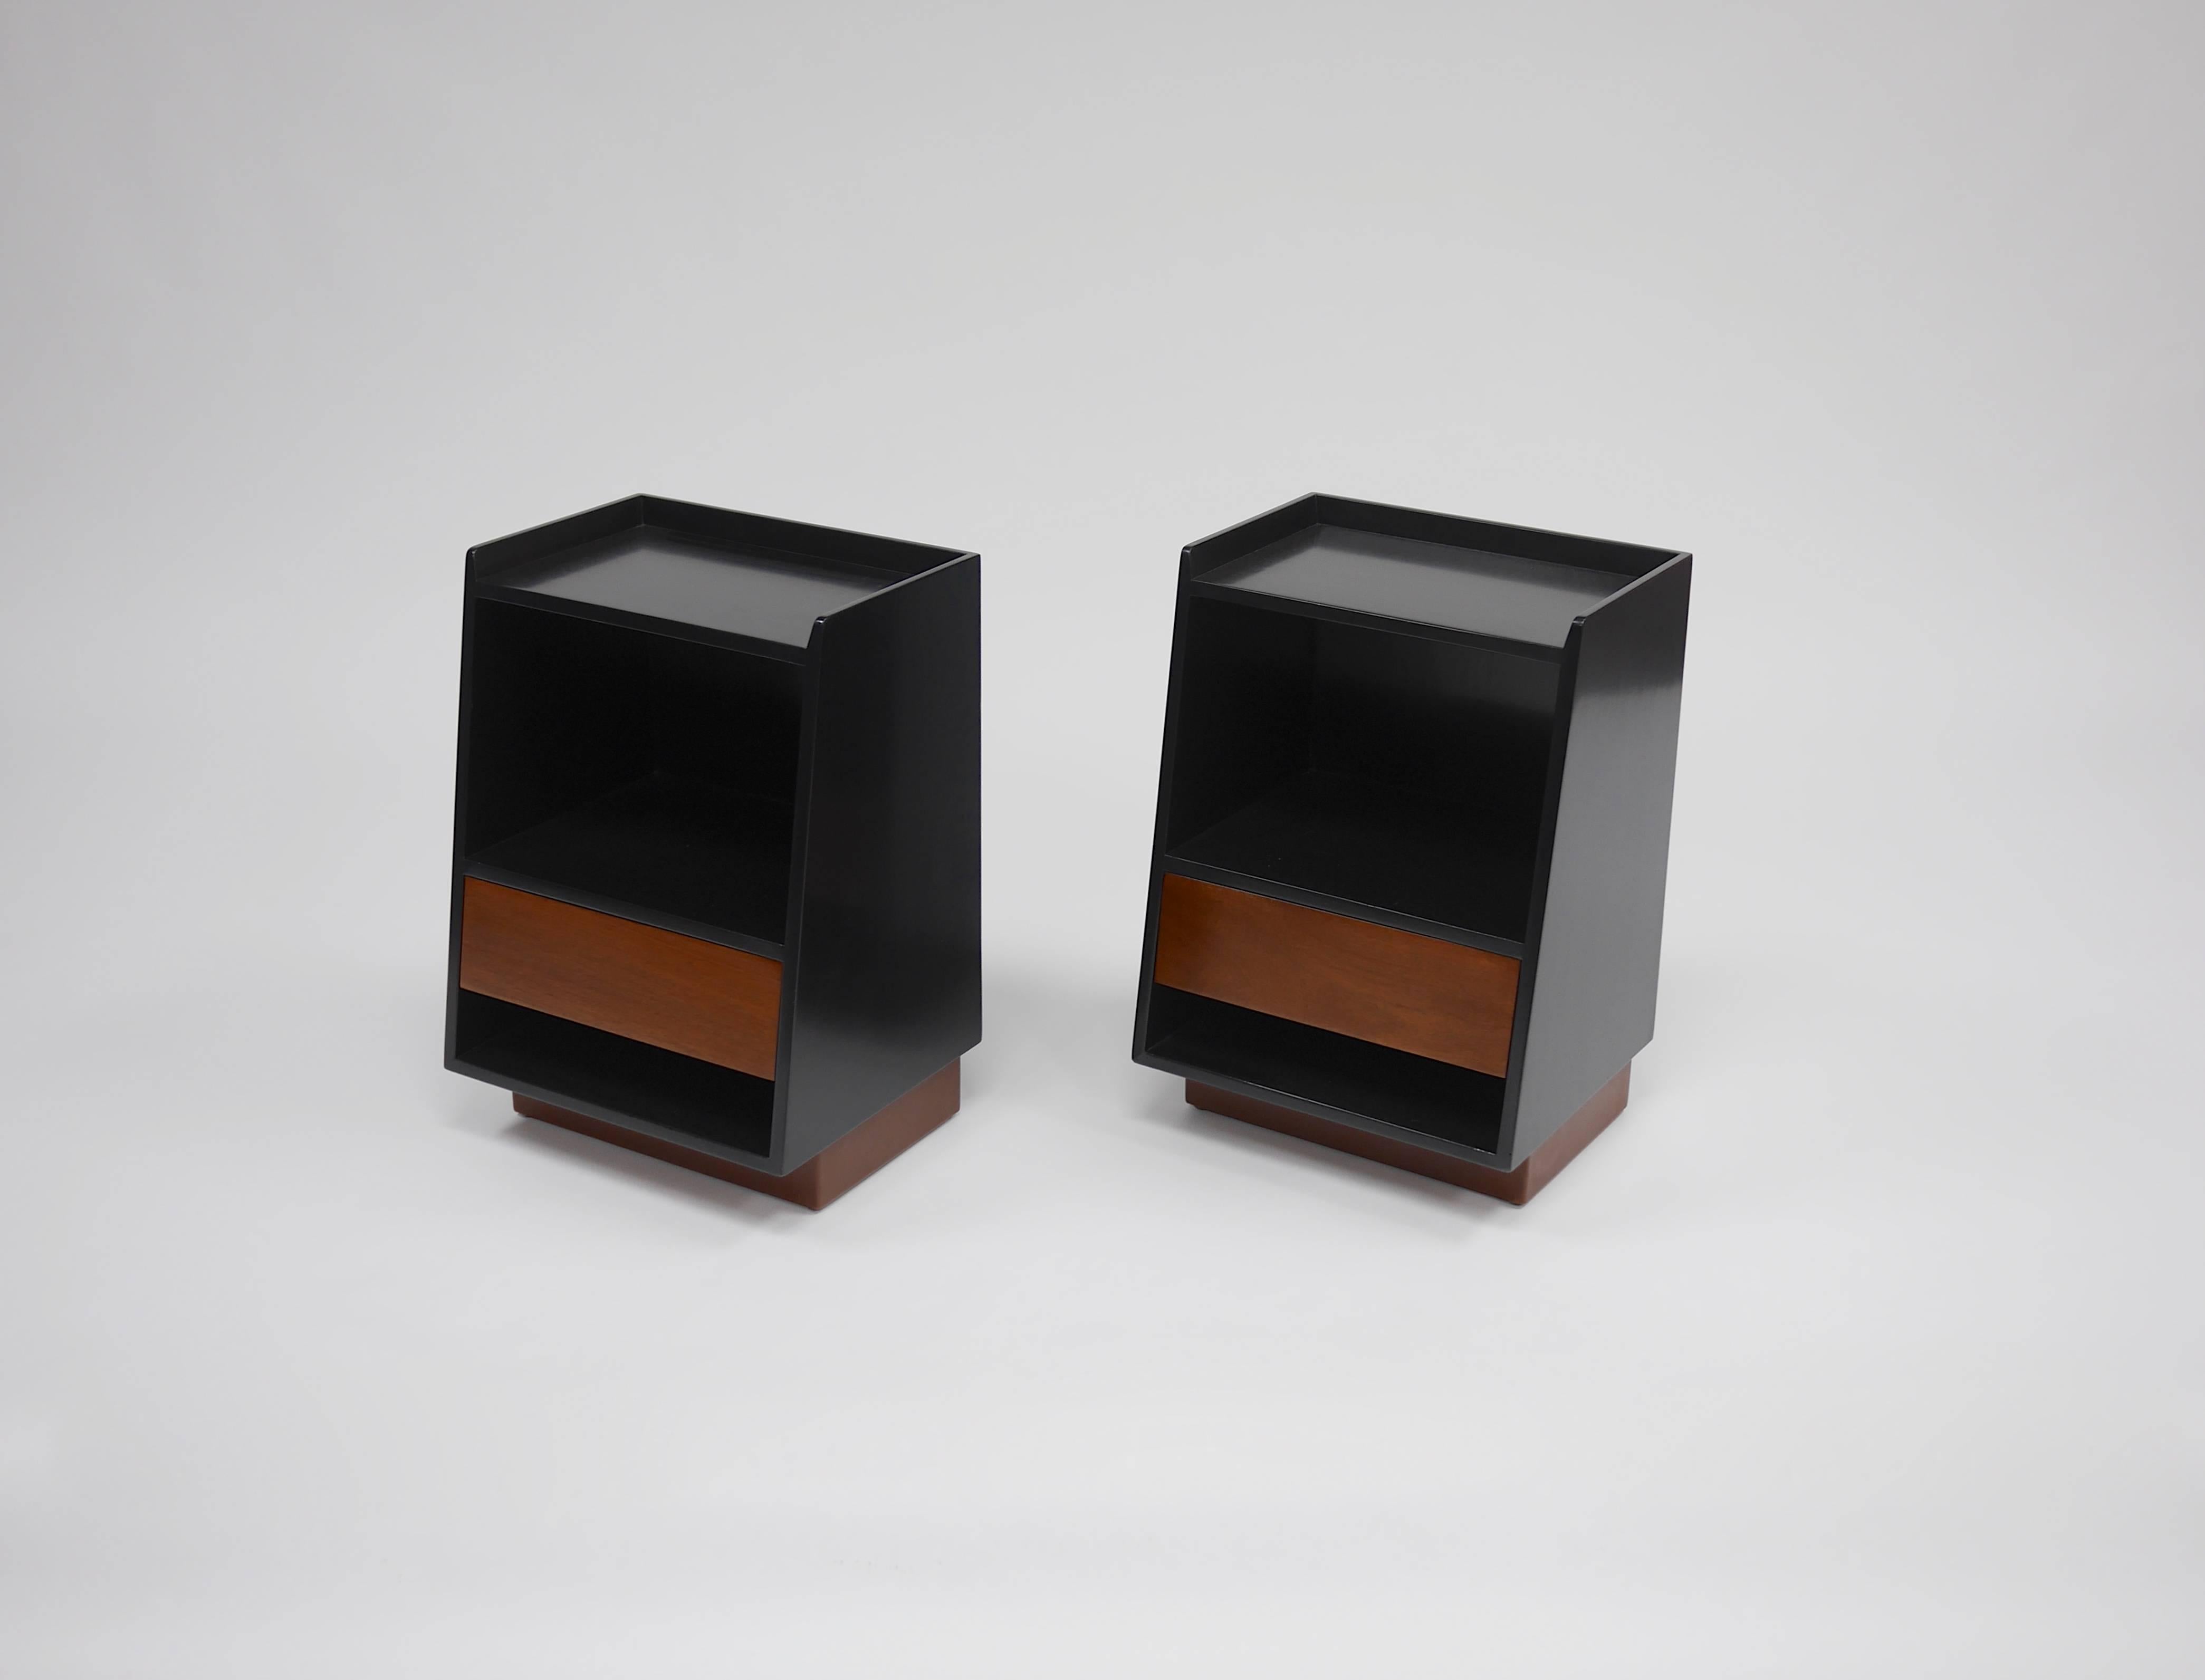 Pair of nightstands by Edward Wormley for Dunbar. Wedge shaped, two tone lacquer, dark walnut cases and lighter drawer fronts, leather plinth bases. Measures: 17